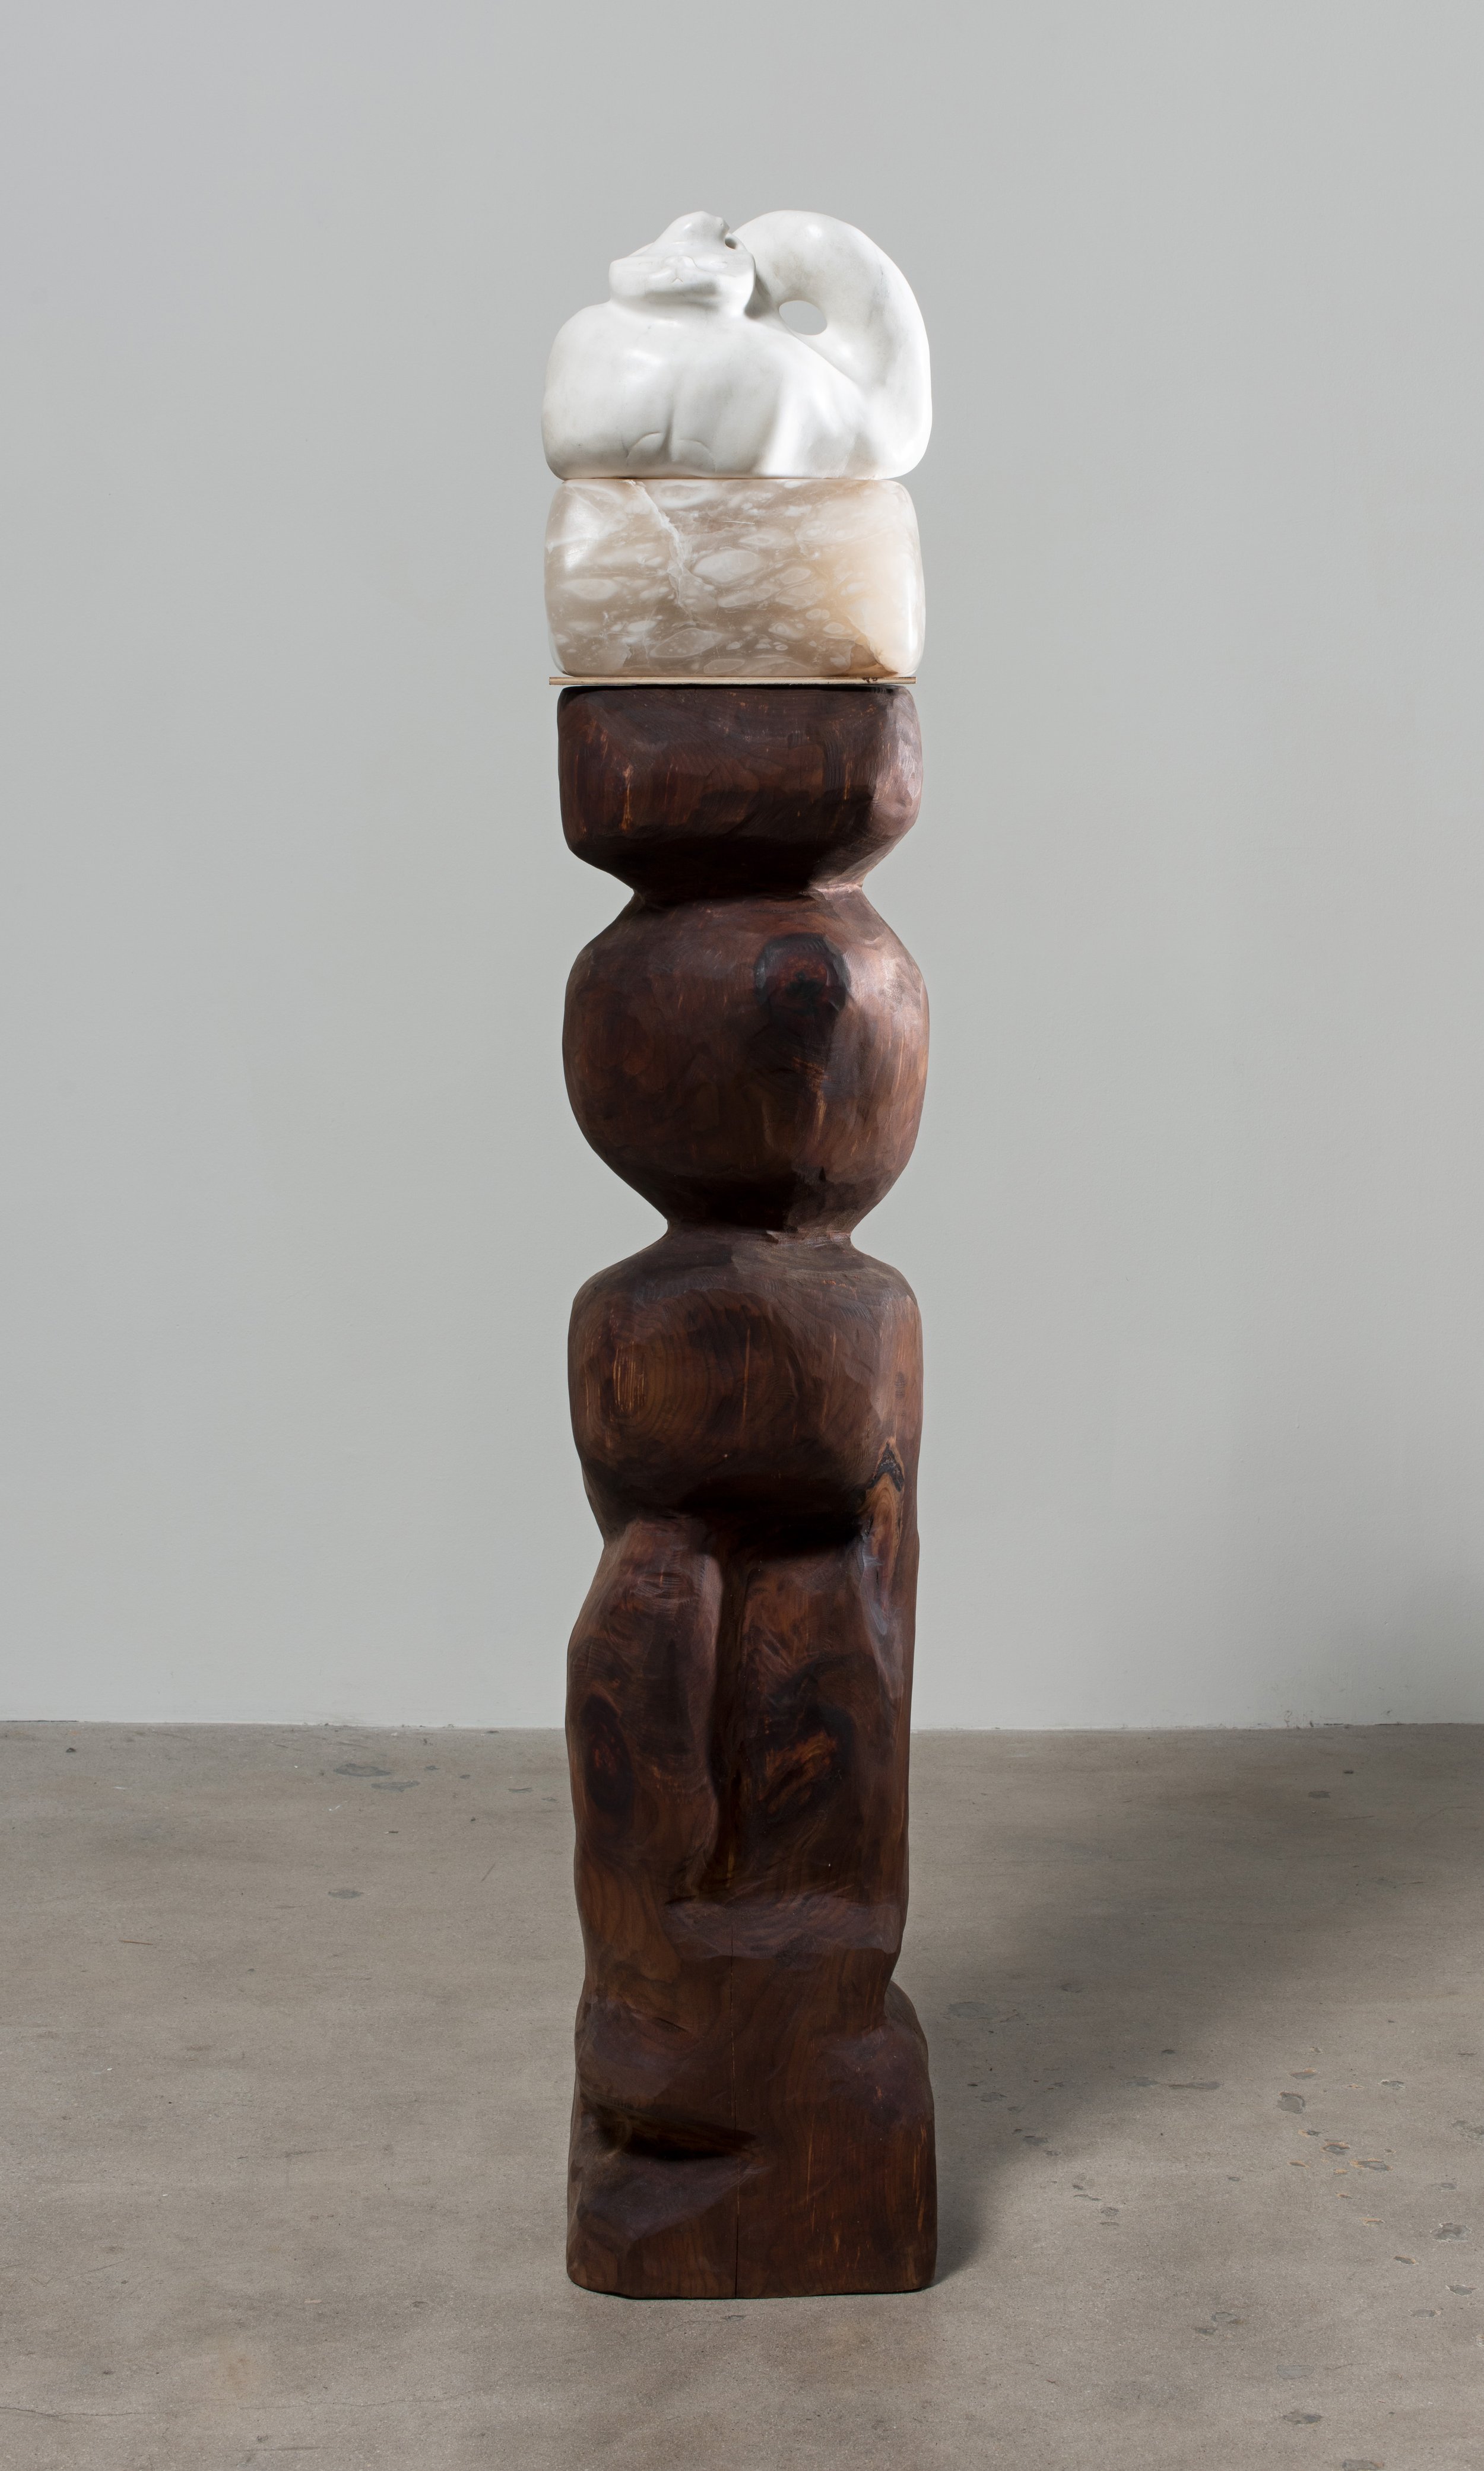   Soft Moon , 2020 Wood, alabaster, and marble 61 1/2 x 11 x 11 inches&nbsp; 